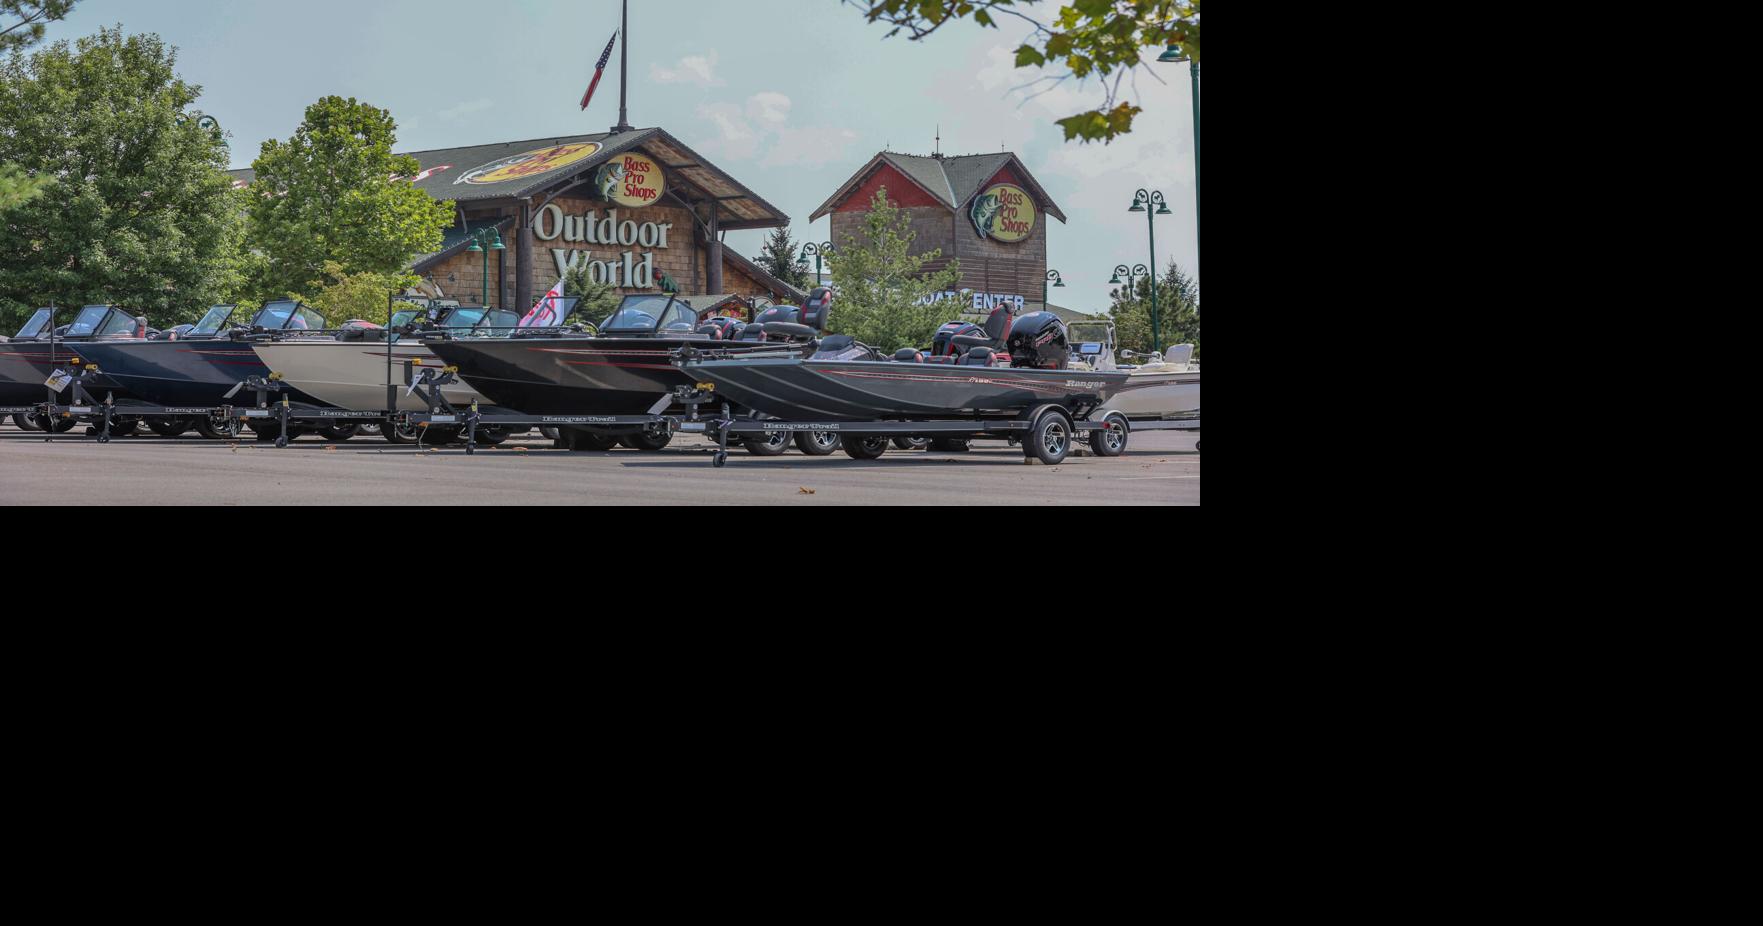 Bass Pro Shops named among U.S. best retailers